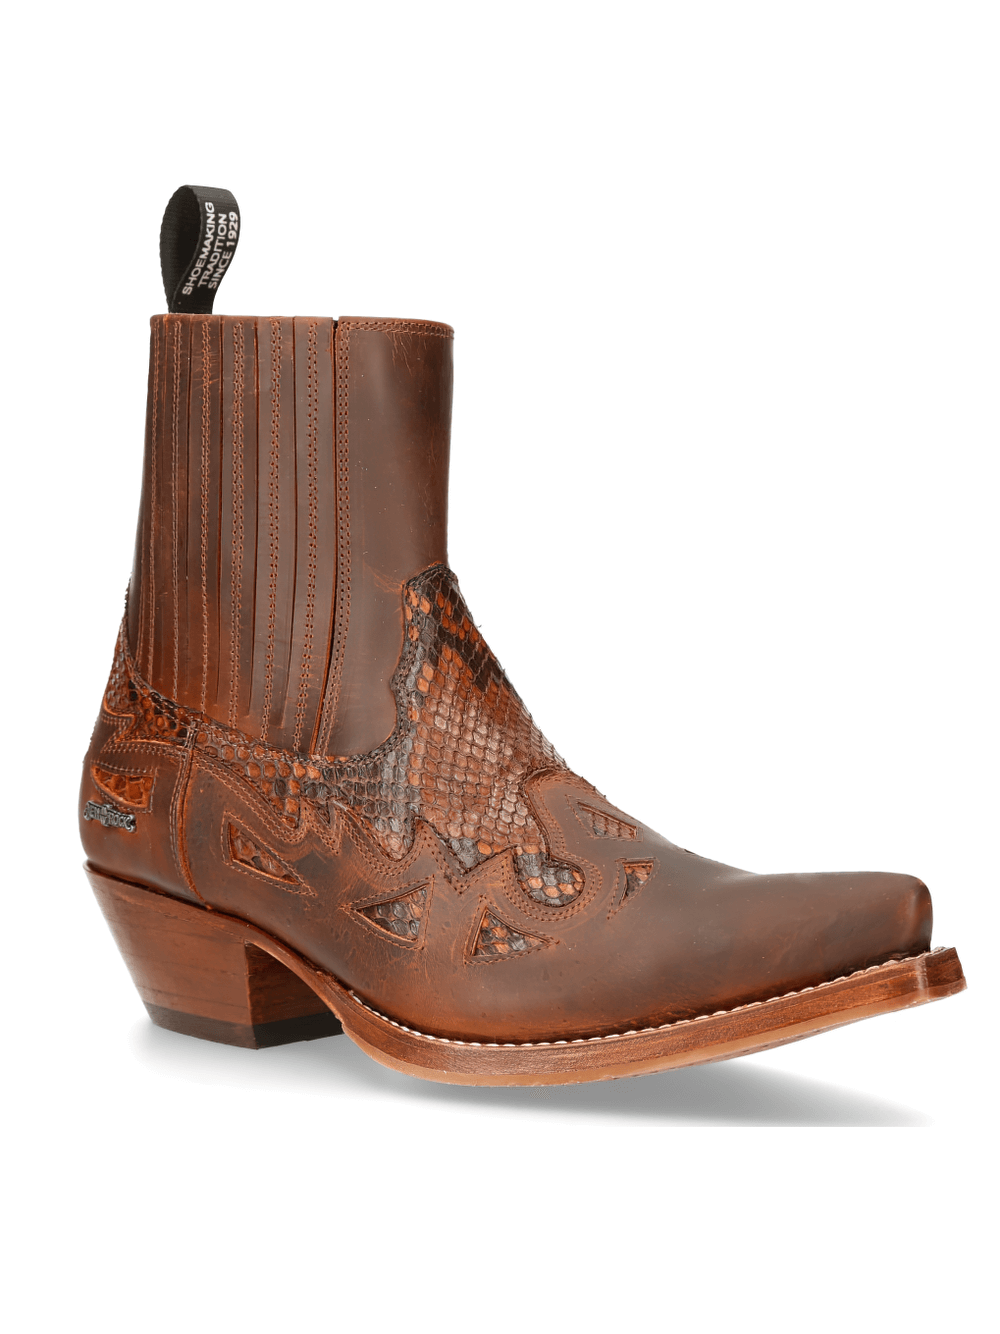 NEW ROCK Zippered Brown Leather Ankle Boots with Detailbi